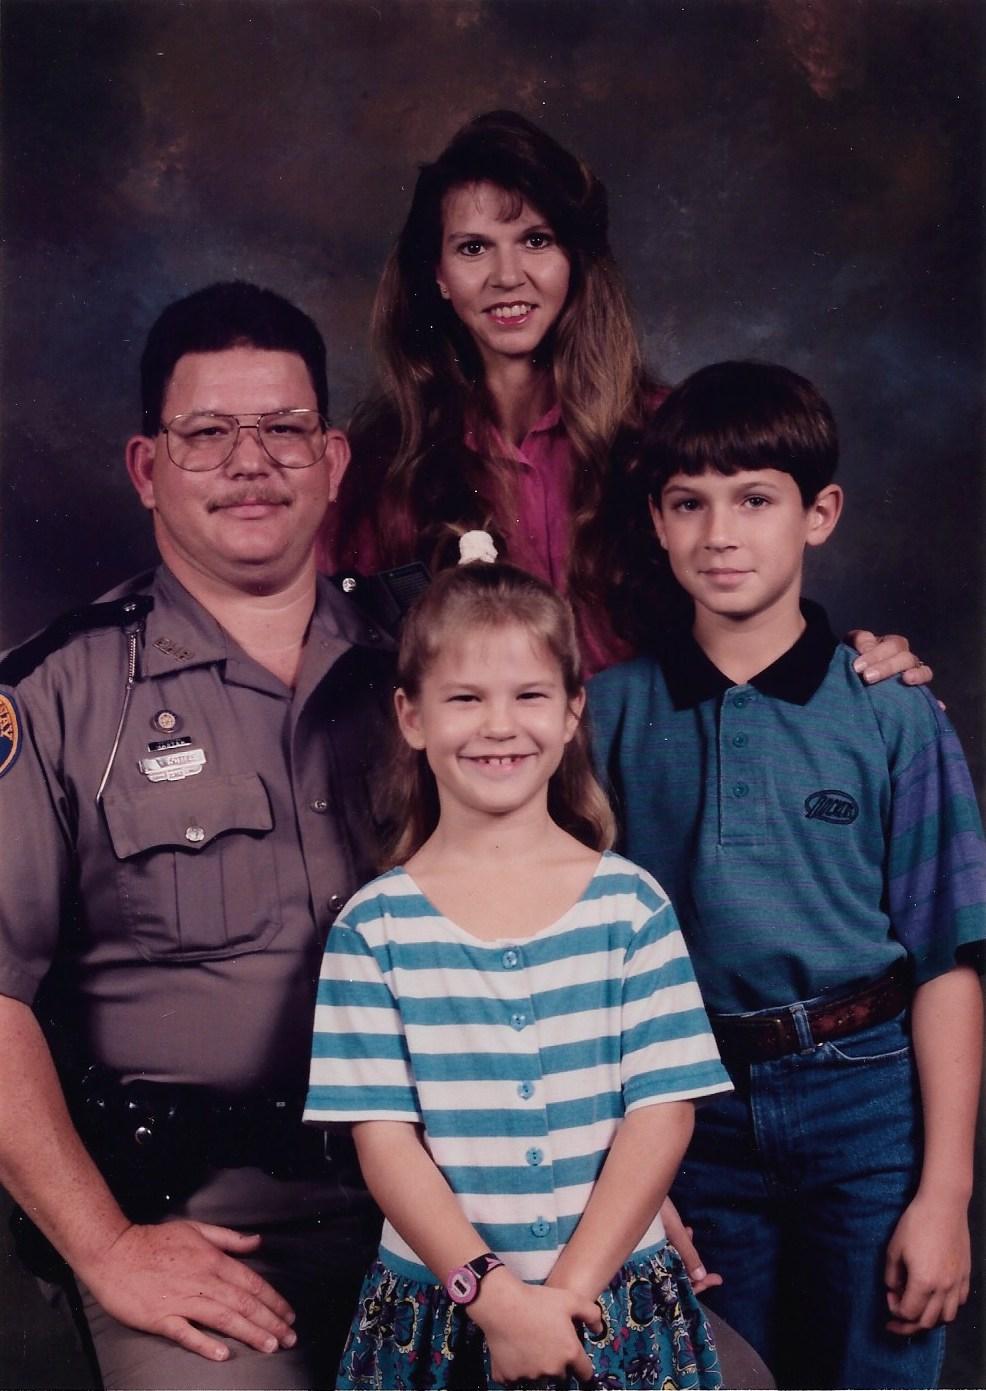 Heather with her family during her childhood. (Courtesy of Heather Ritter)